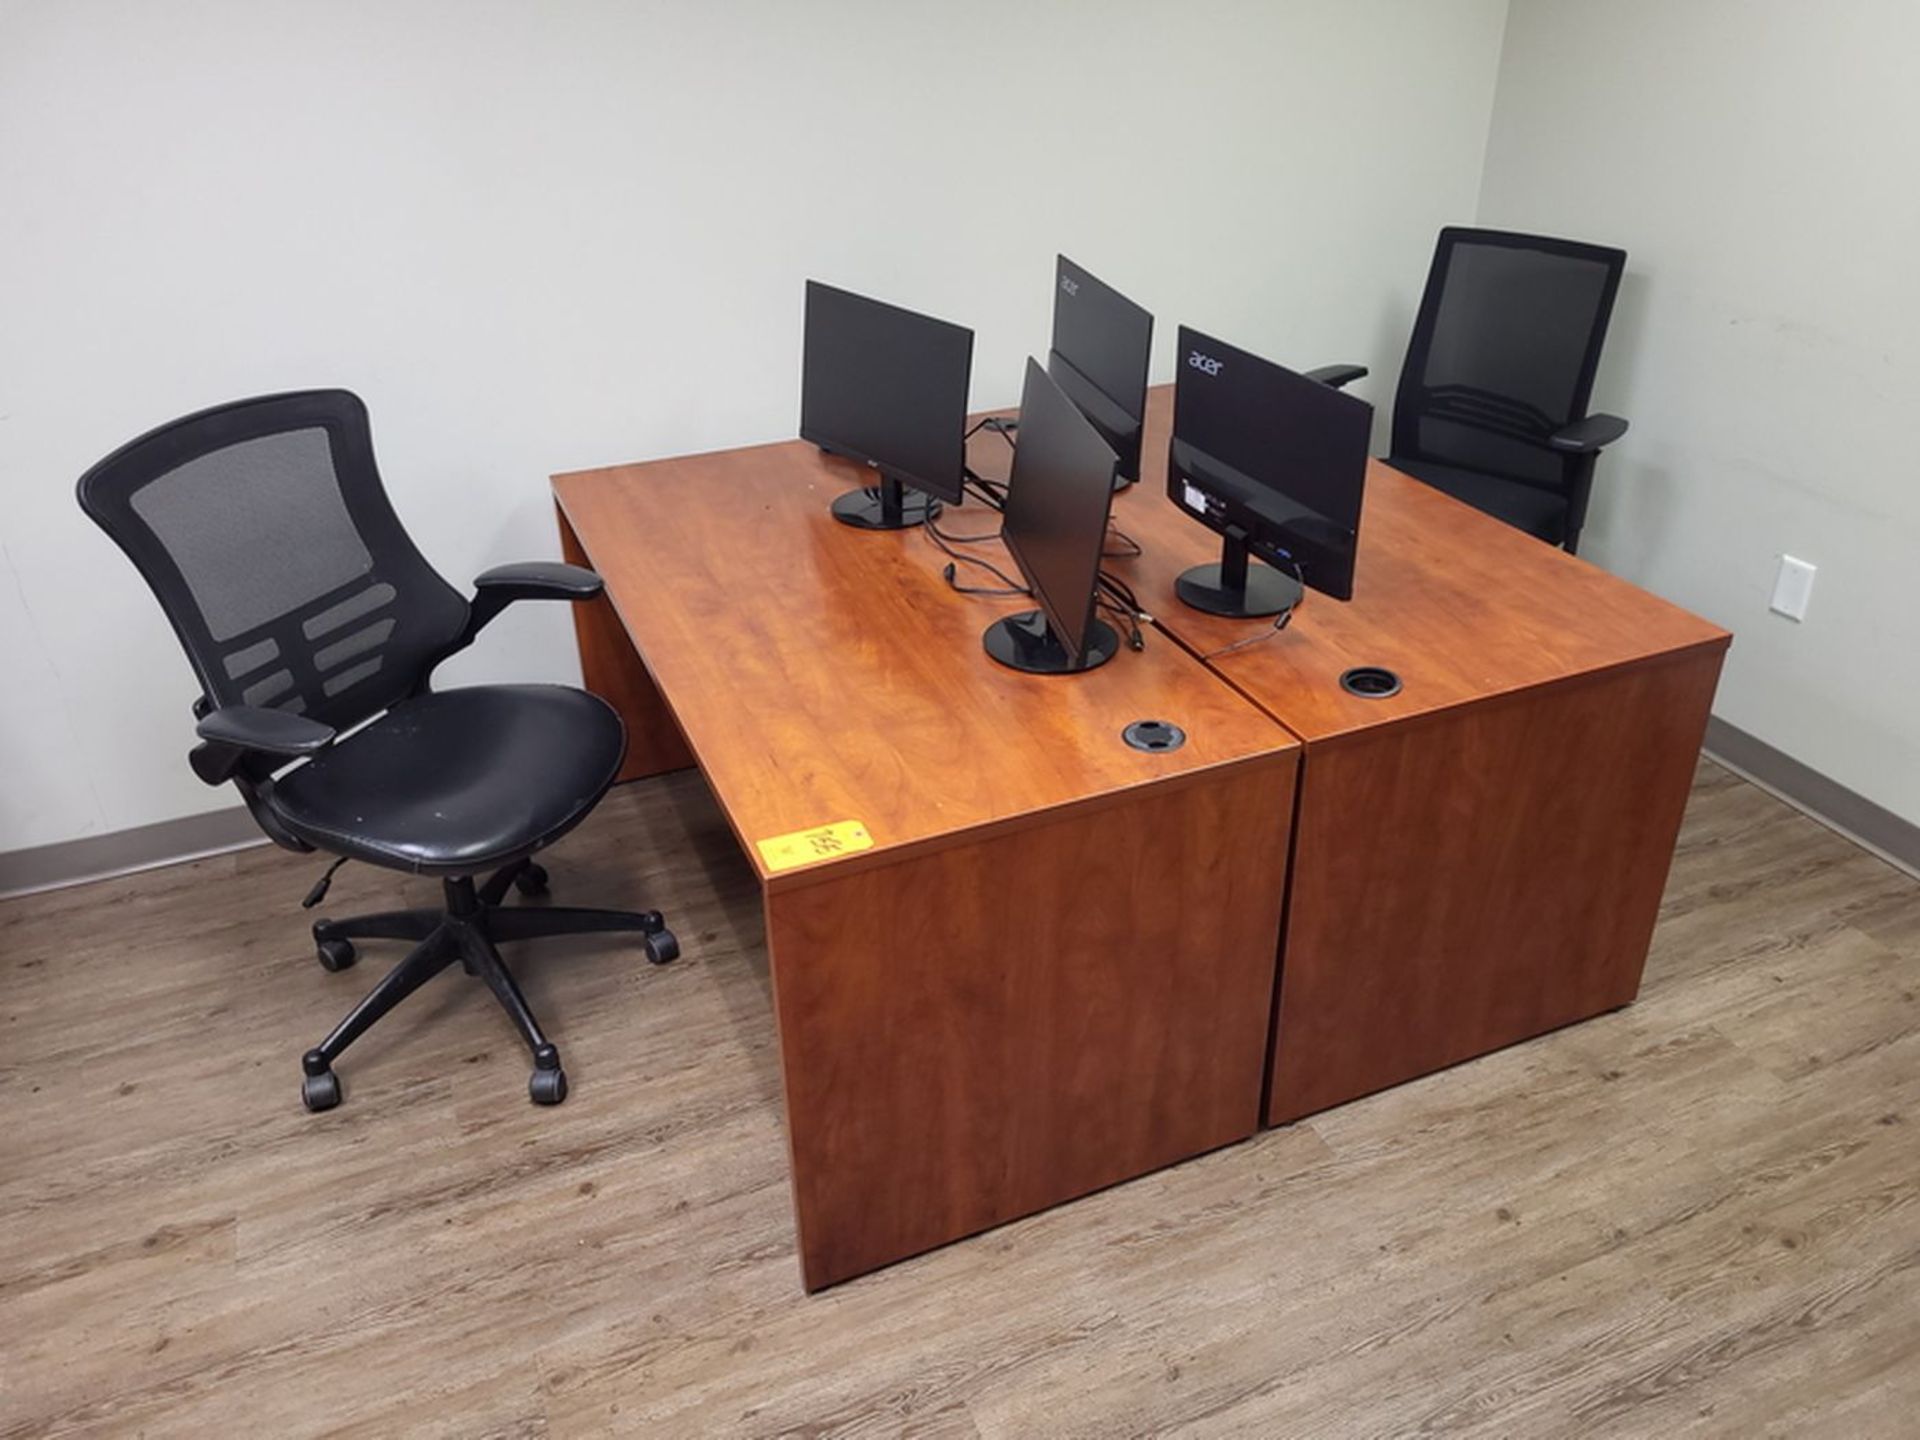 Lot - Office Furnishings; to Include: (2) Wood Office Desks, (2) Monitor Stands with Acer